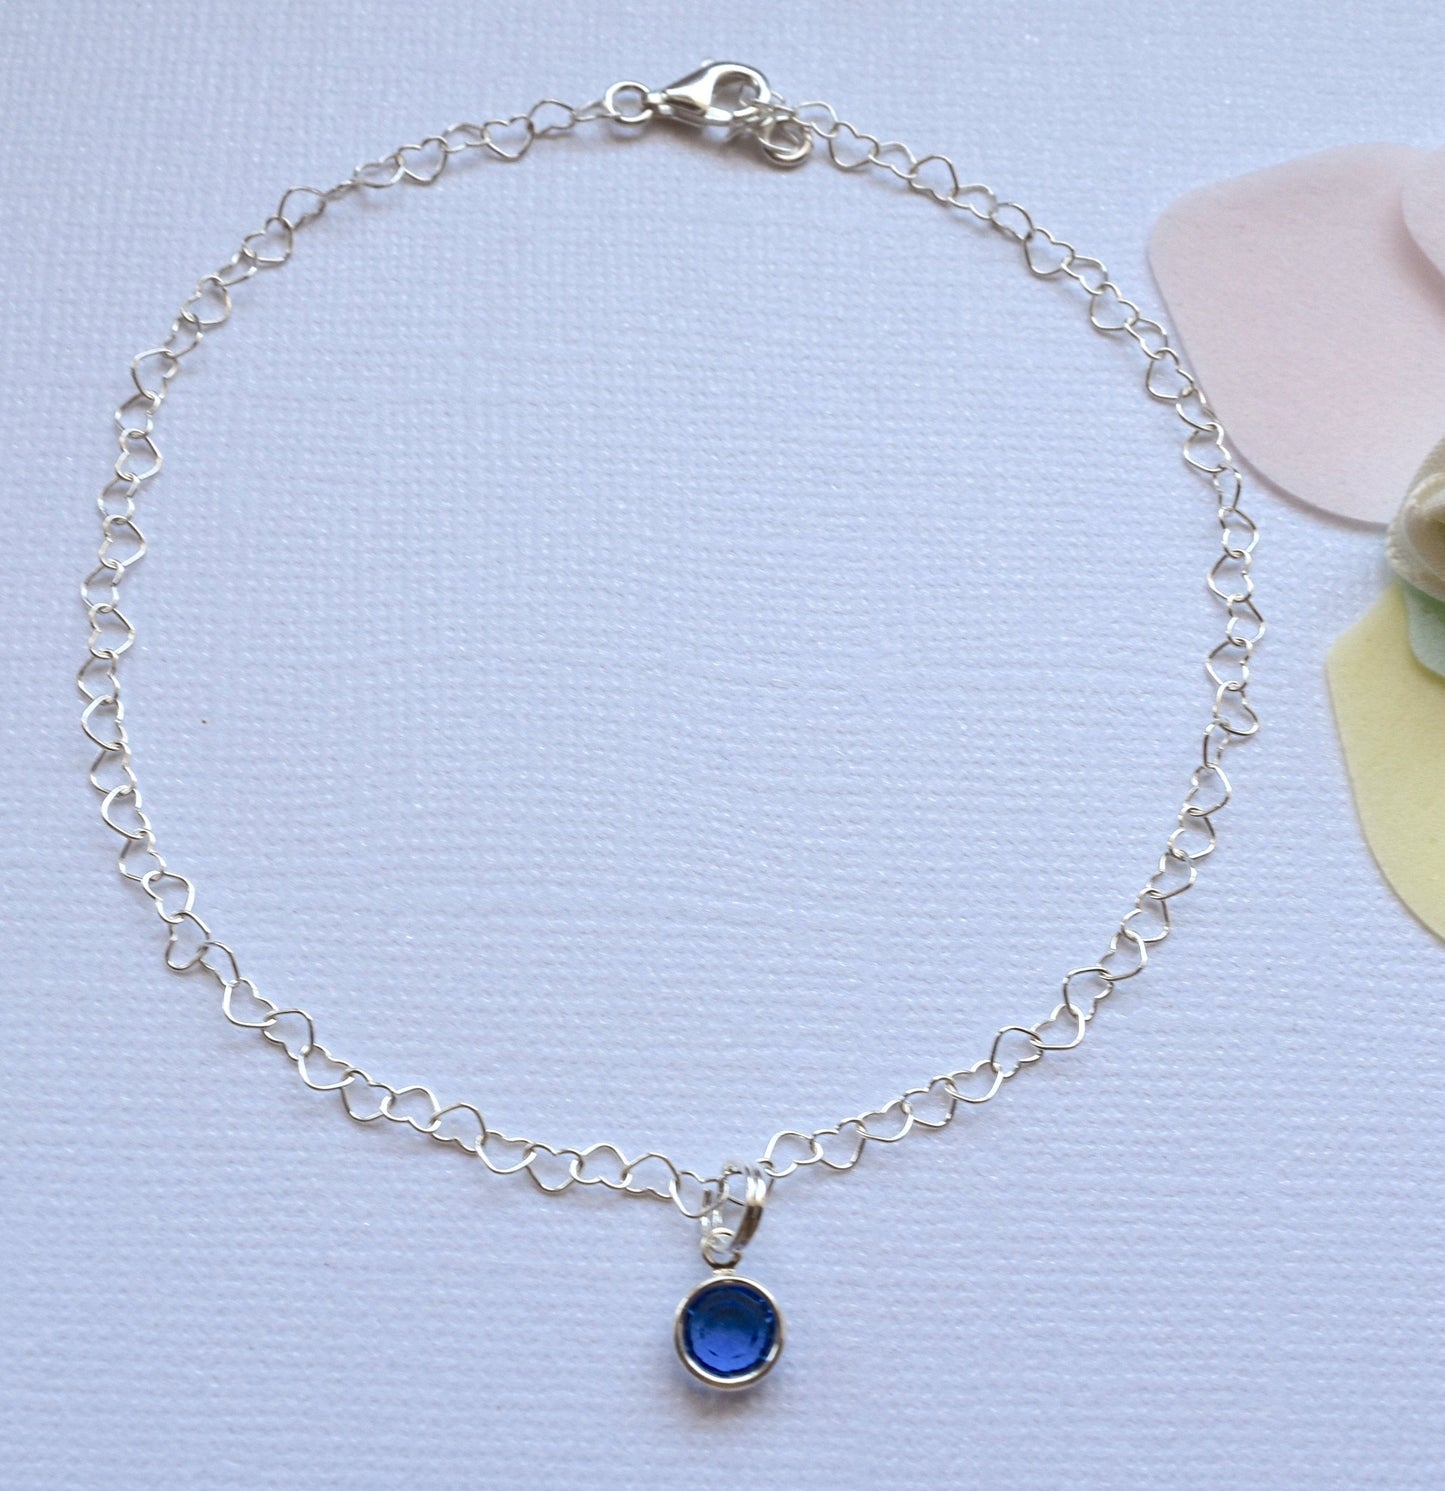 anklet with heart shaped links and blue stone